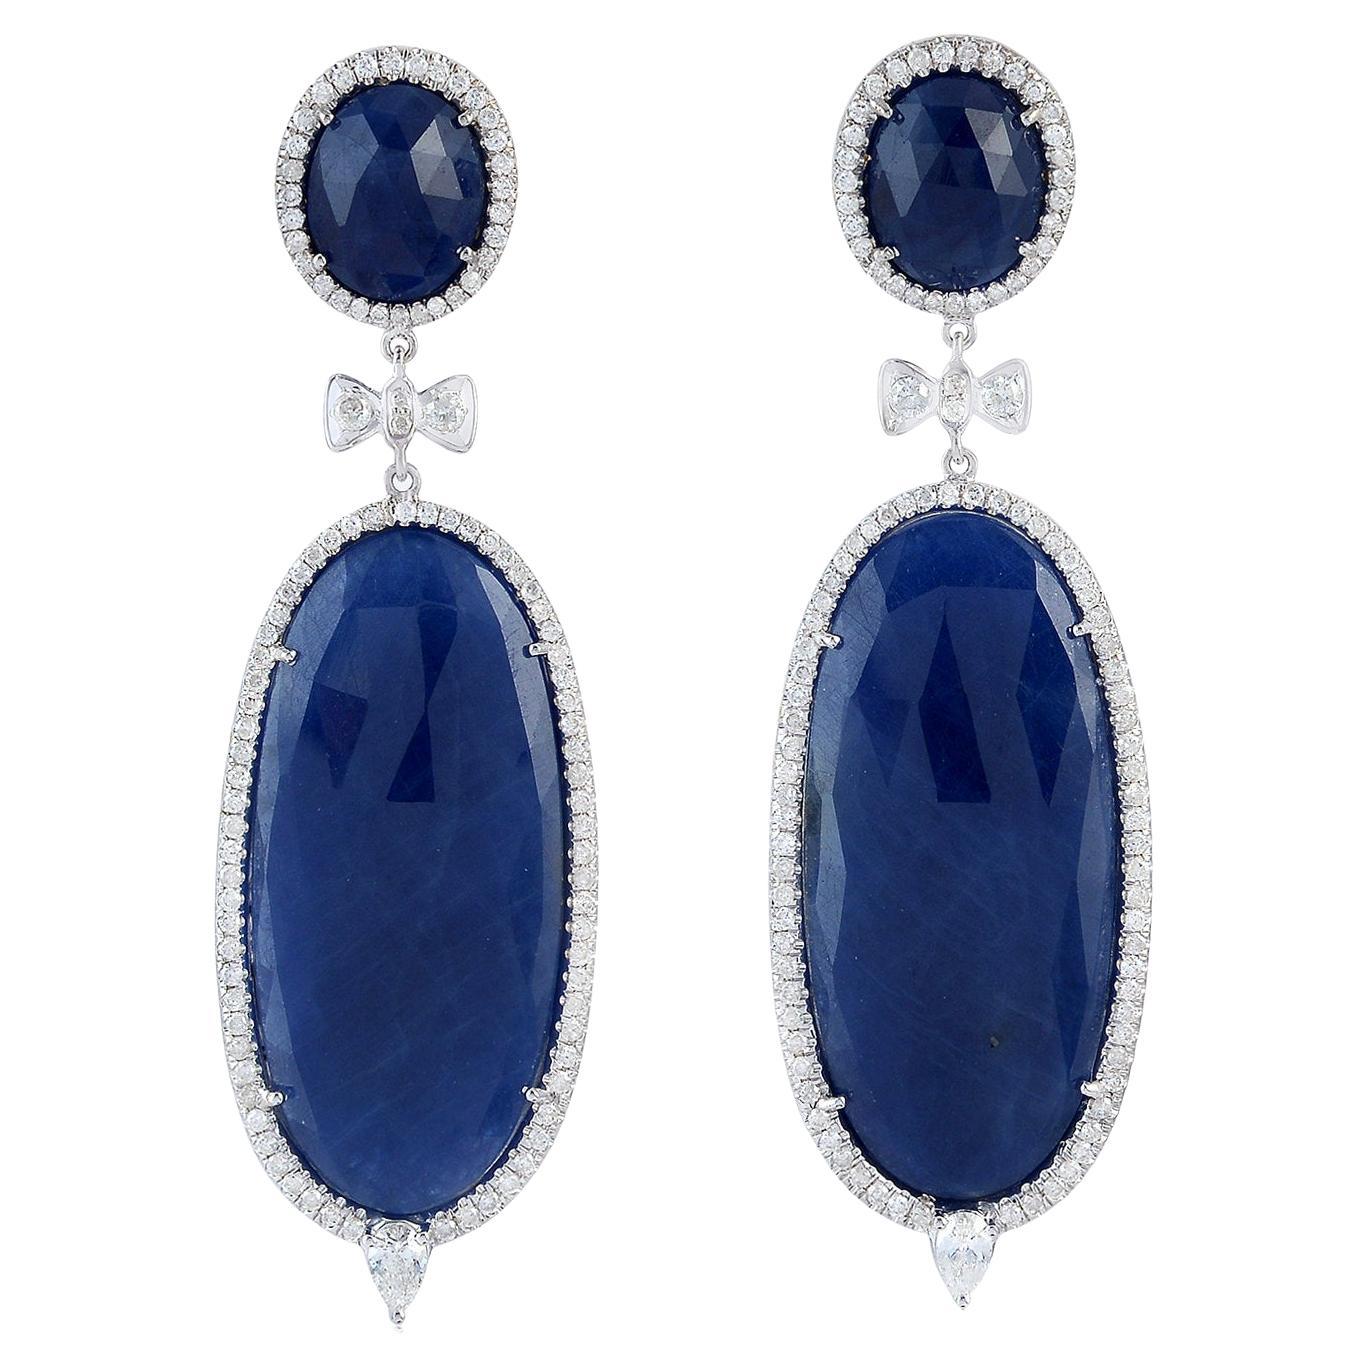 Blue Sapphire Drop Shaped Earring with Pave Diamonds Made in 18k White Gold